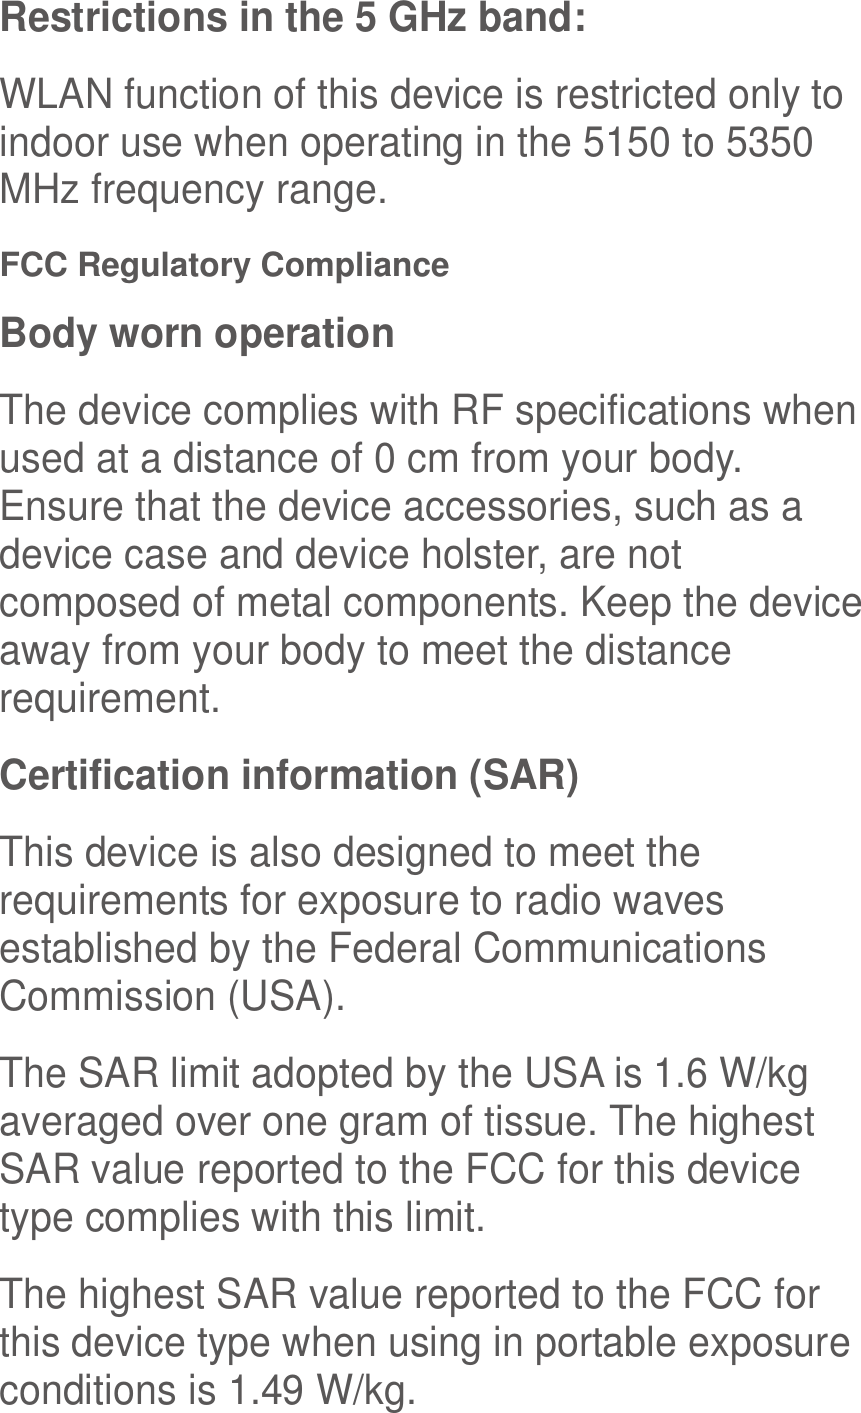  Restrictions in the 5 GHz band: WLAN function of this device is restricted only to indoor use when operating in the 5150 to 5350 MHz frequency range. FCC Regulatory Compliance Body worn operation The device complies with RF specifications when used at a distance of 0 cm from your body. Ensure that the device accessories, such as a device case and device holster, are not composed of metal components. Keep the device away from your body to meet the distance requirement. Certification information (SAR) This device is also designed to meet the requirements for exposure to radio waves established by the Federal Communications Commission (USA). The SAR limit adopted by the USA is 1.6 W/kg averaged over one gram of tissue. The highest SAR value reported to the FCC for this device type complies with this limit. The highest SAR value reported to the FCC for this device type when using in portable exposure conditions is 1.49 W/kg. 